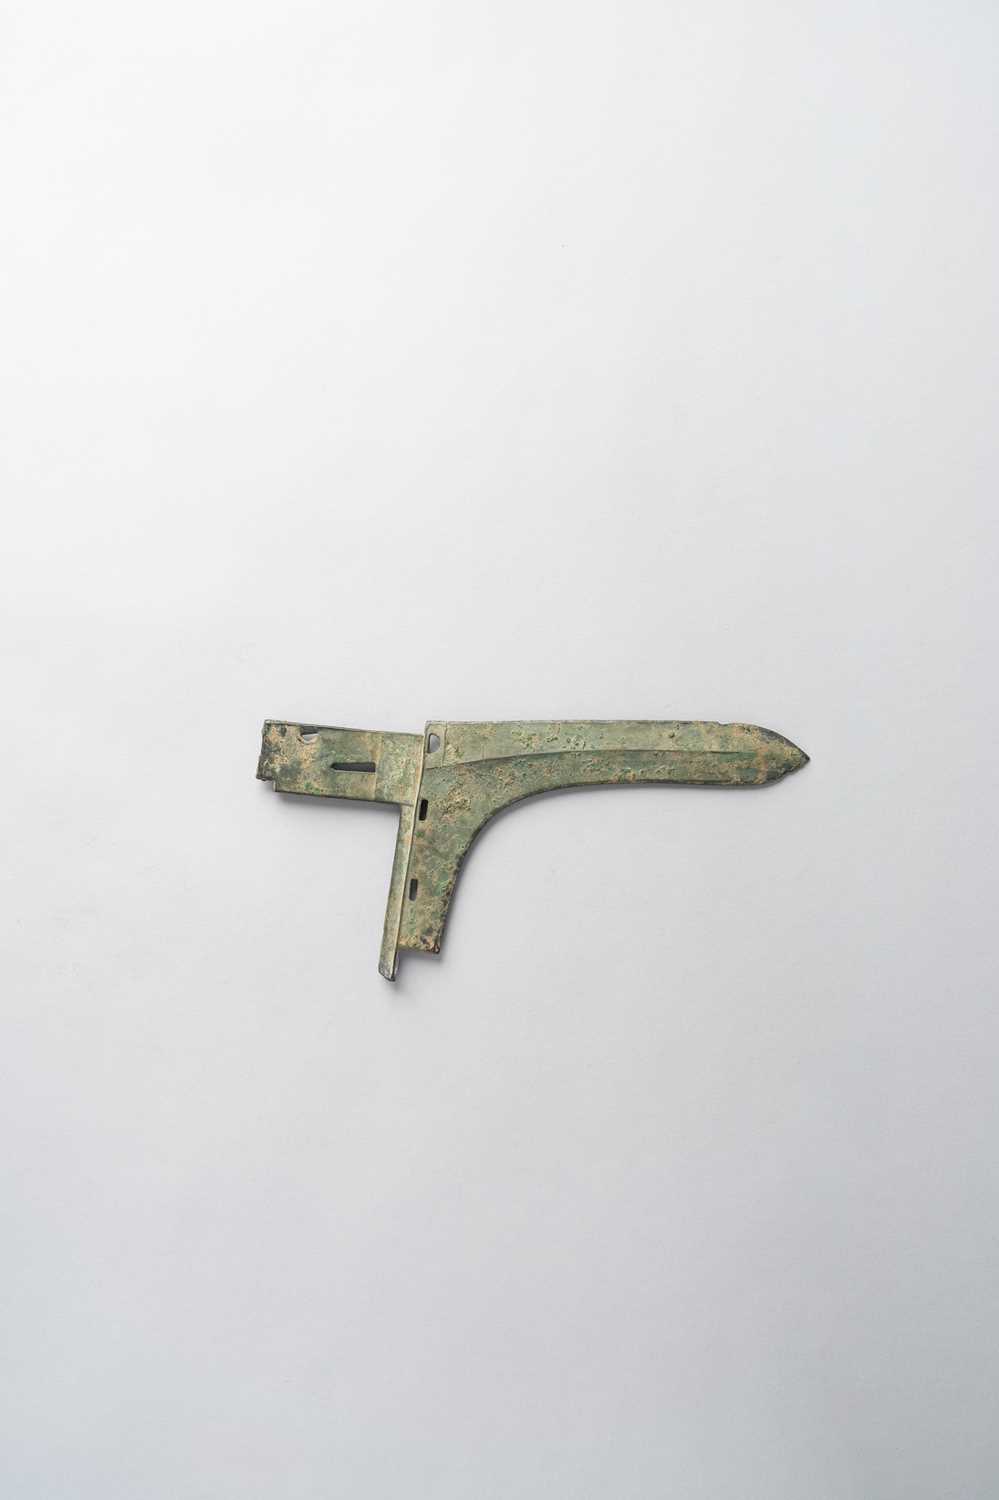 A CHINESE BRONZE DAGGER-AXE, GE EASTERN ZHOU DYNASTY The bronze L-shaped curved blade with a - Image 2 of 4